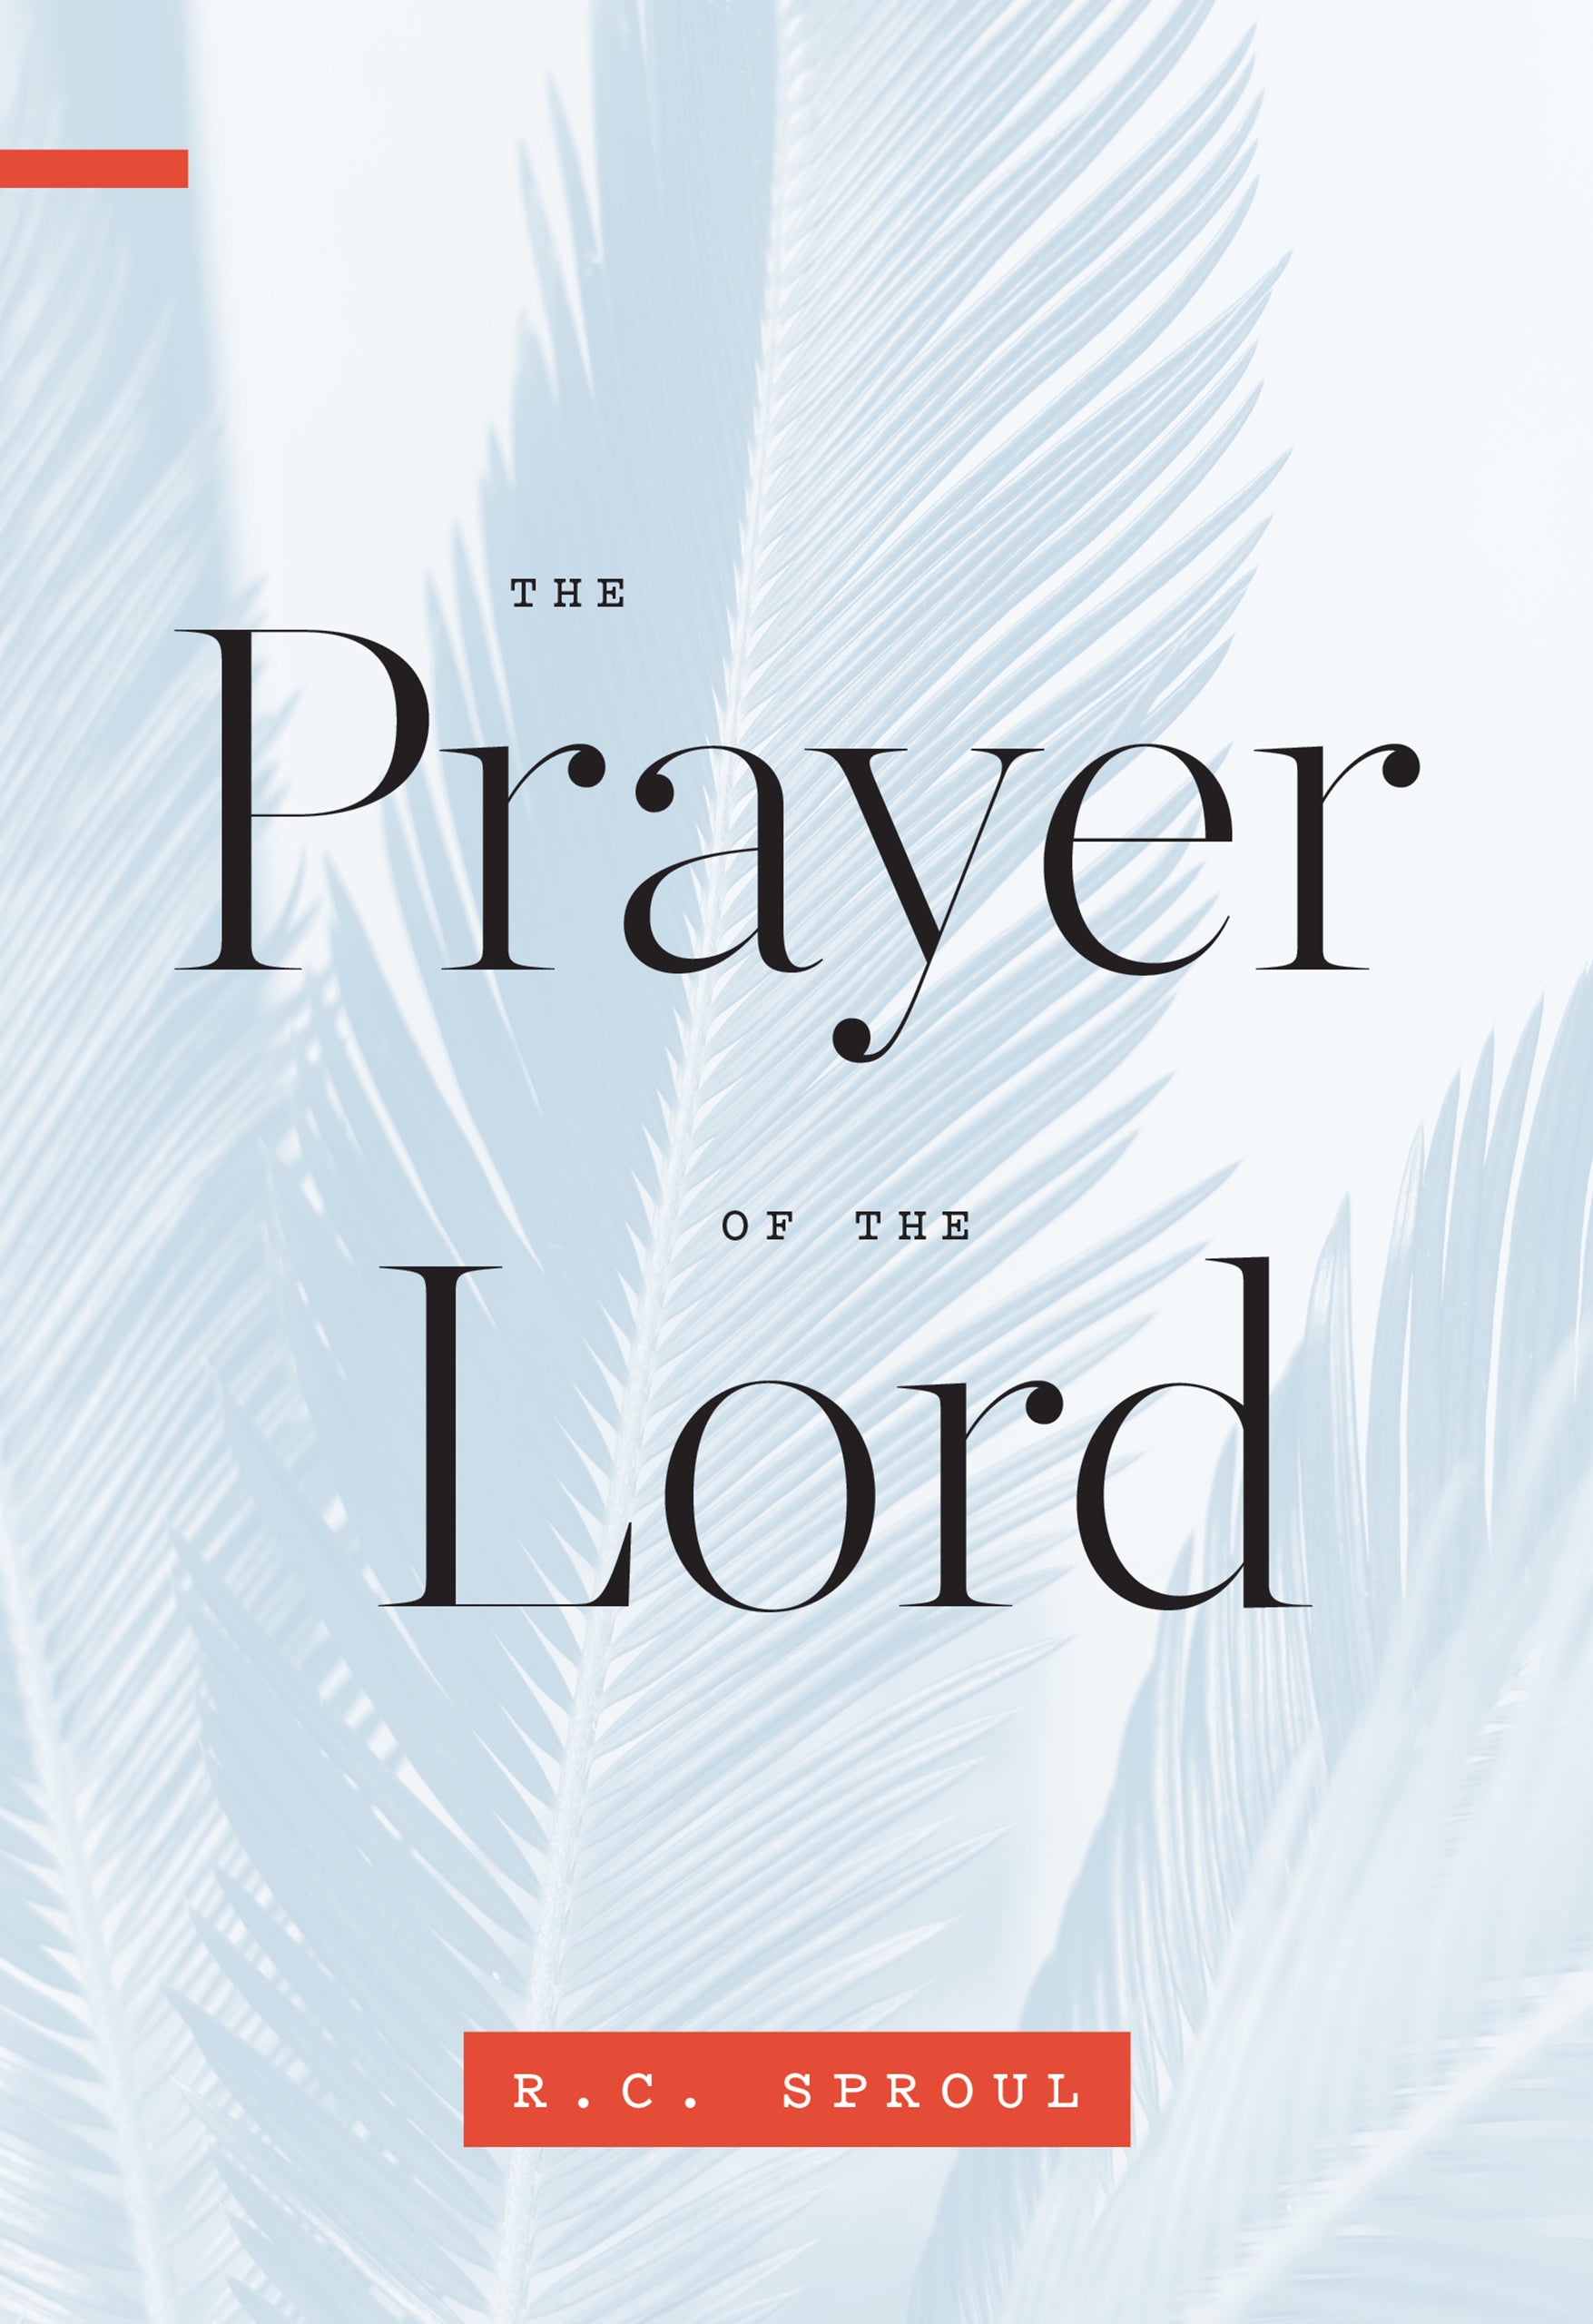 The Prayer of the Lord: R.C. Sproul - Paperback, Book | Ligonier ...